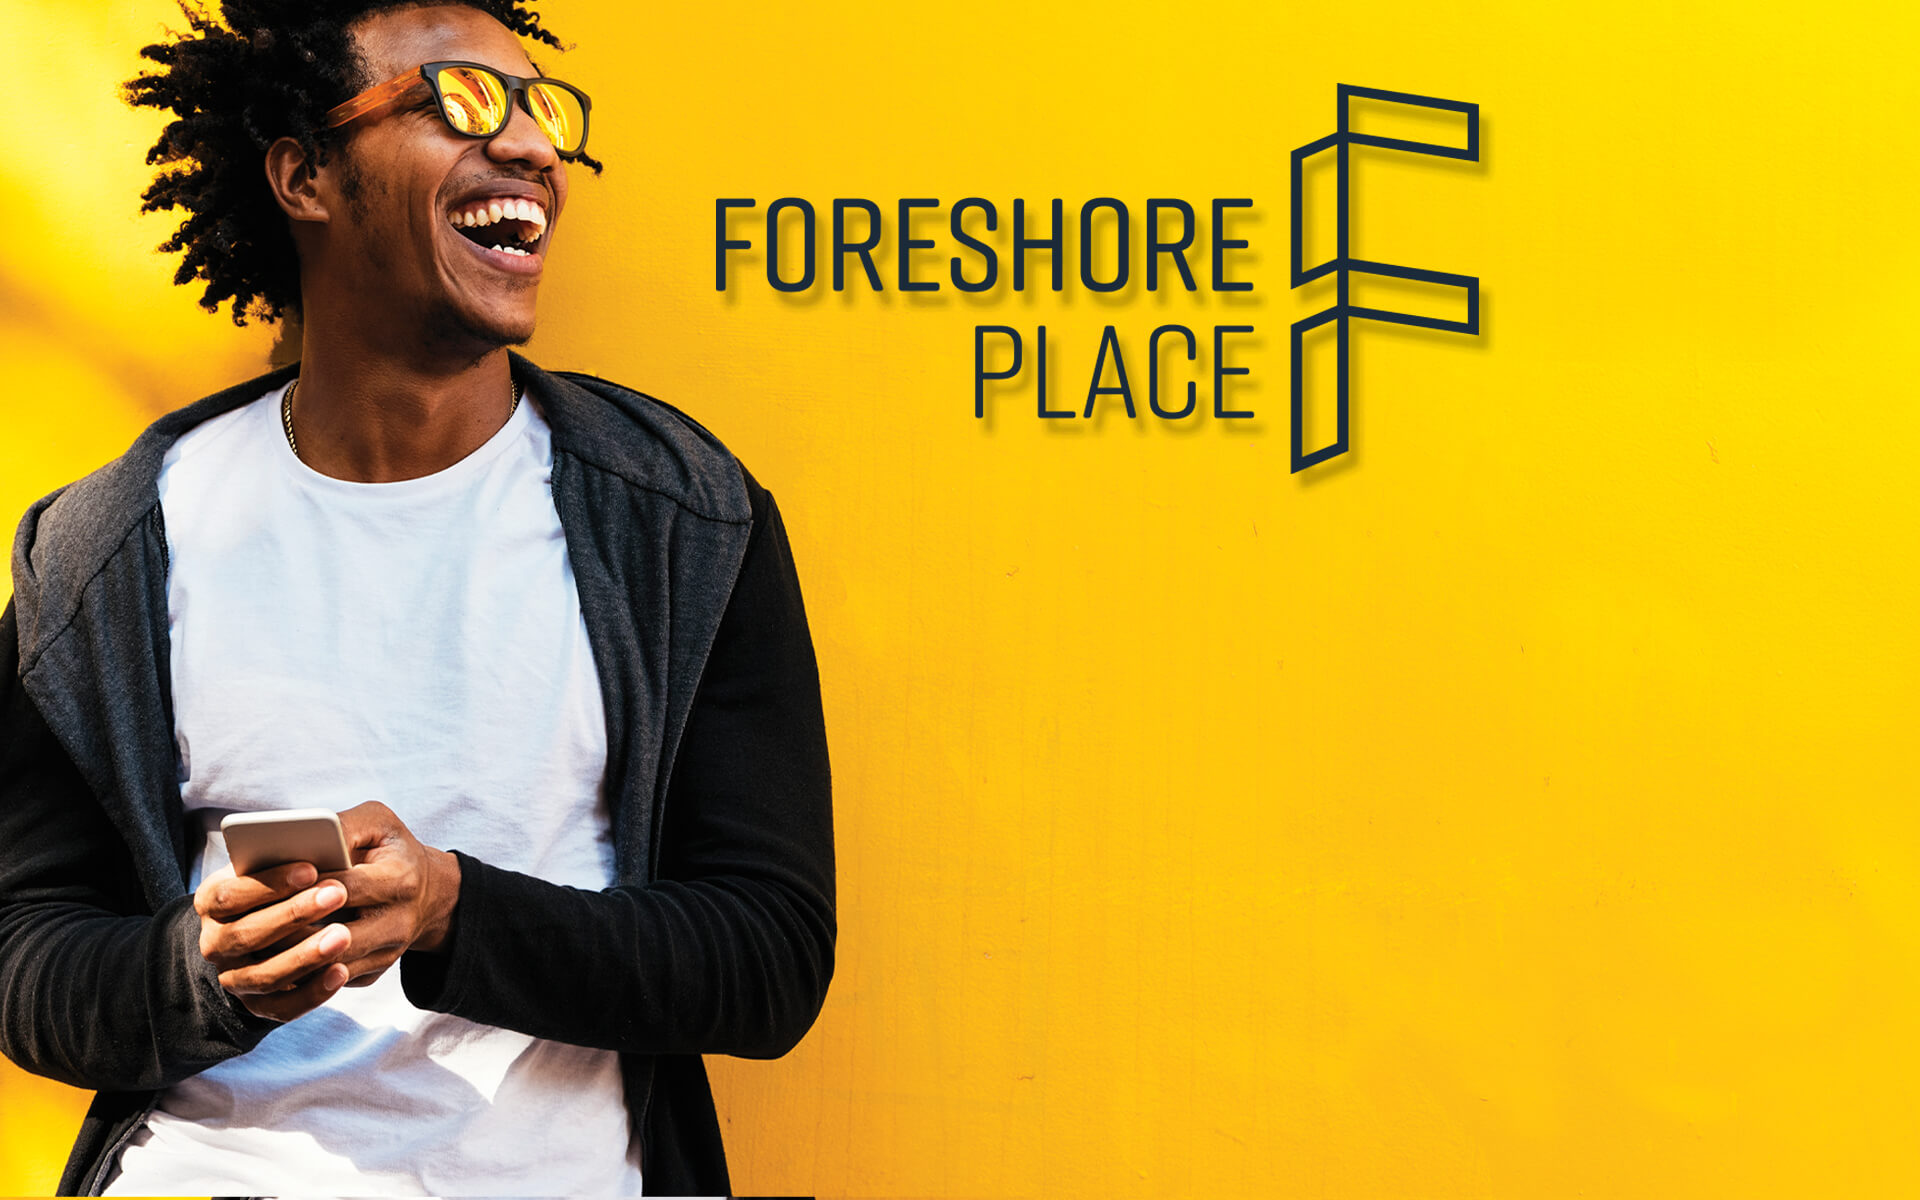 Foreshore Place